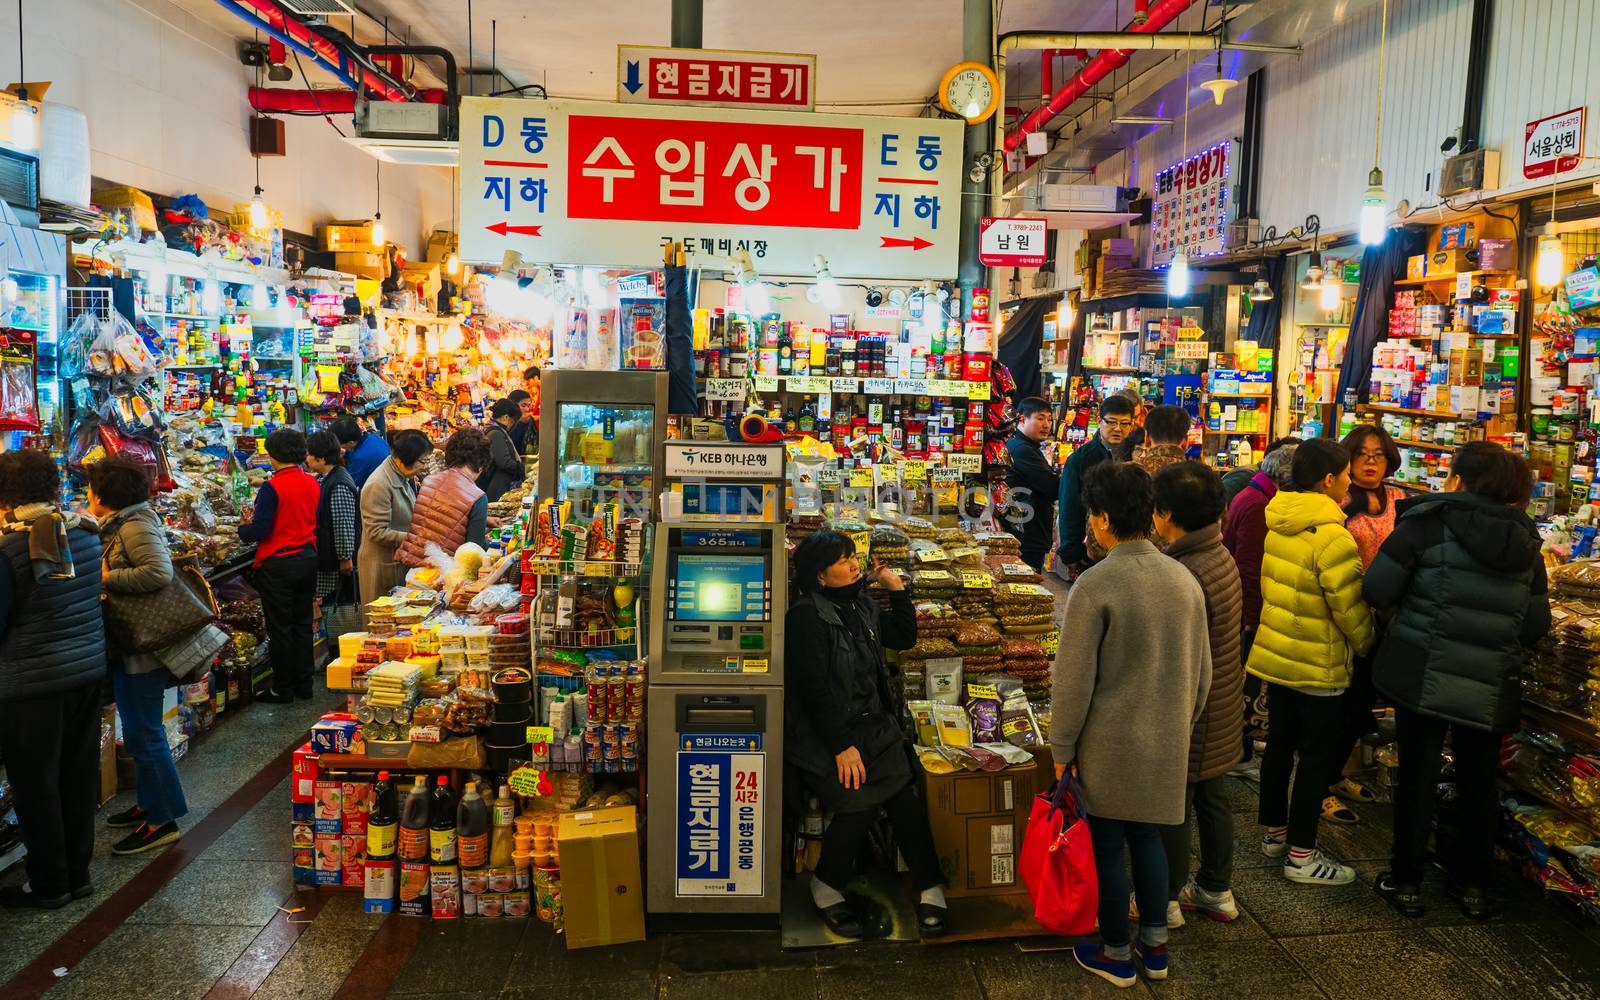 seoul, south korea - 11th november 2017: crowds at the  colorful traditional grocery market selling a zillion items